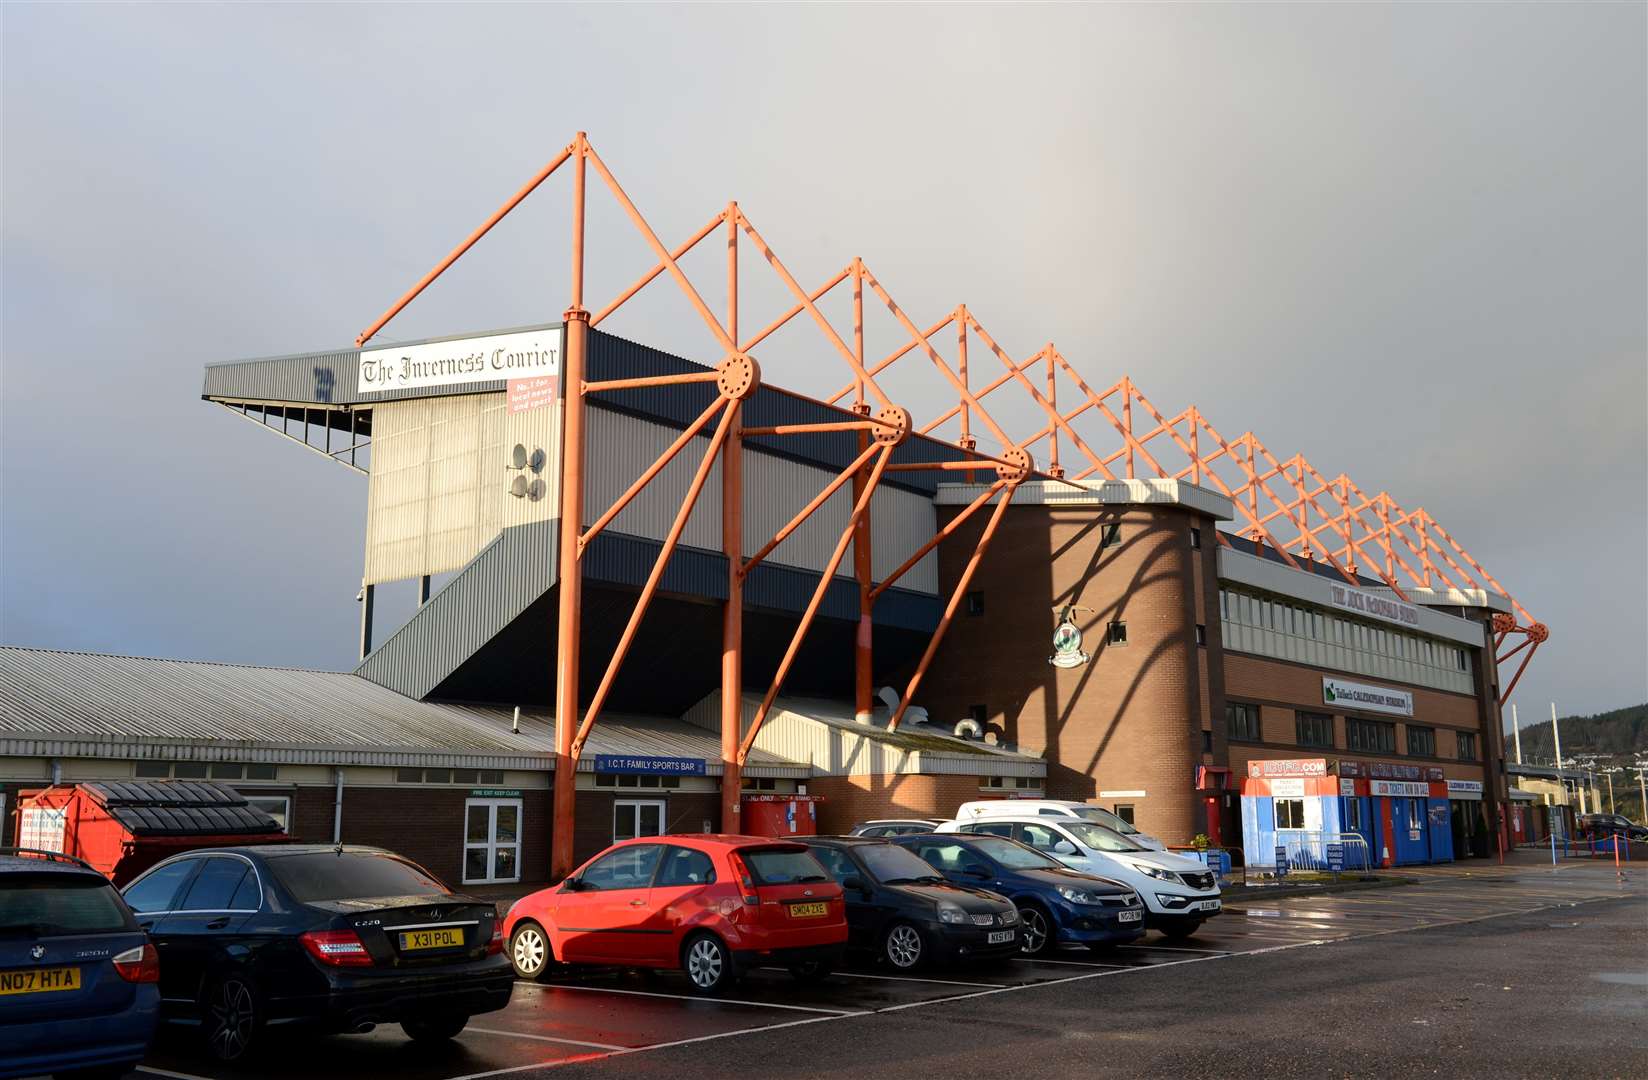 The Caledonian Stadium, where the match will take place.